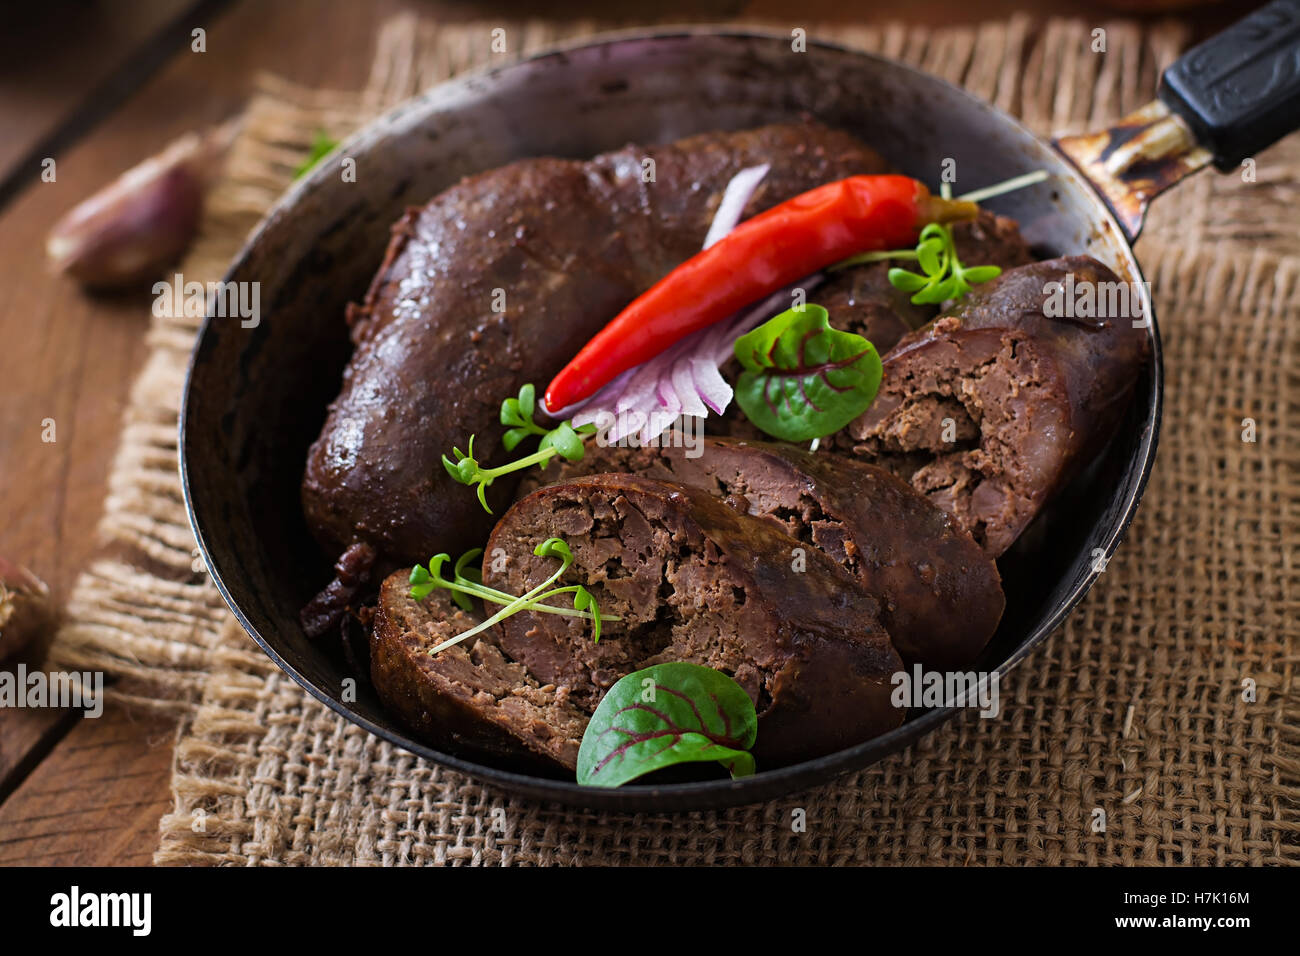 Homemade blood sausage with offal on the old wooden background in rustic style Stock Photo